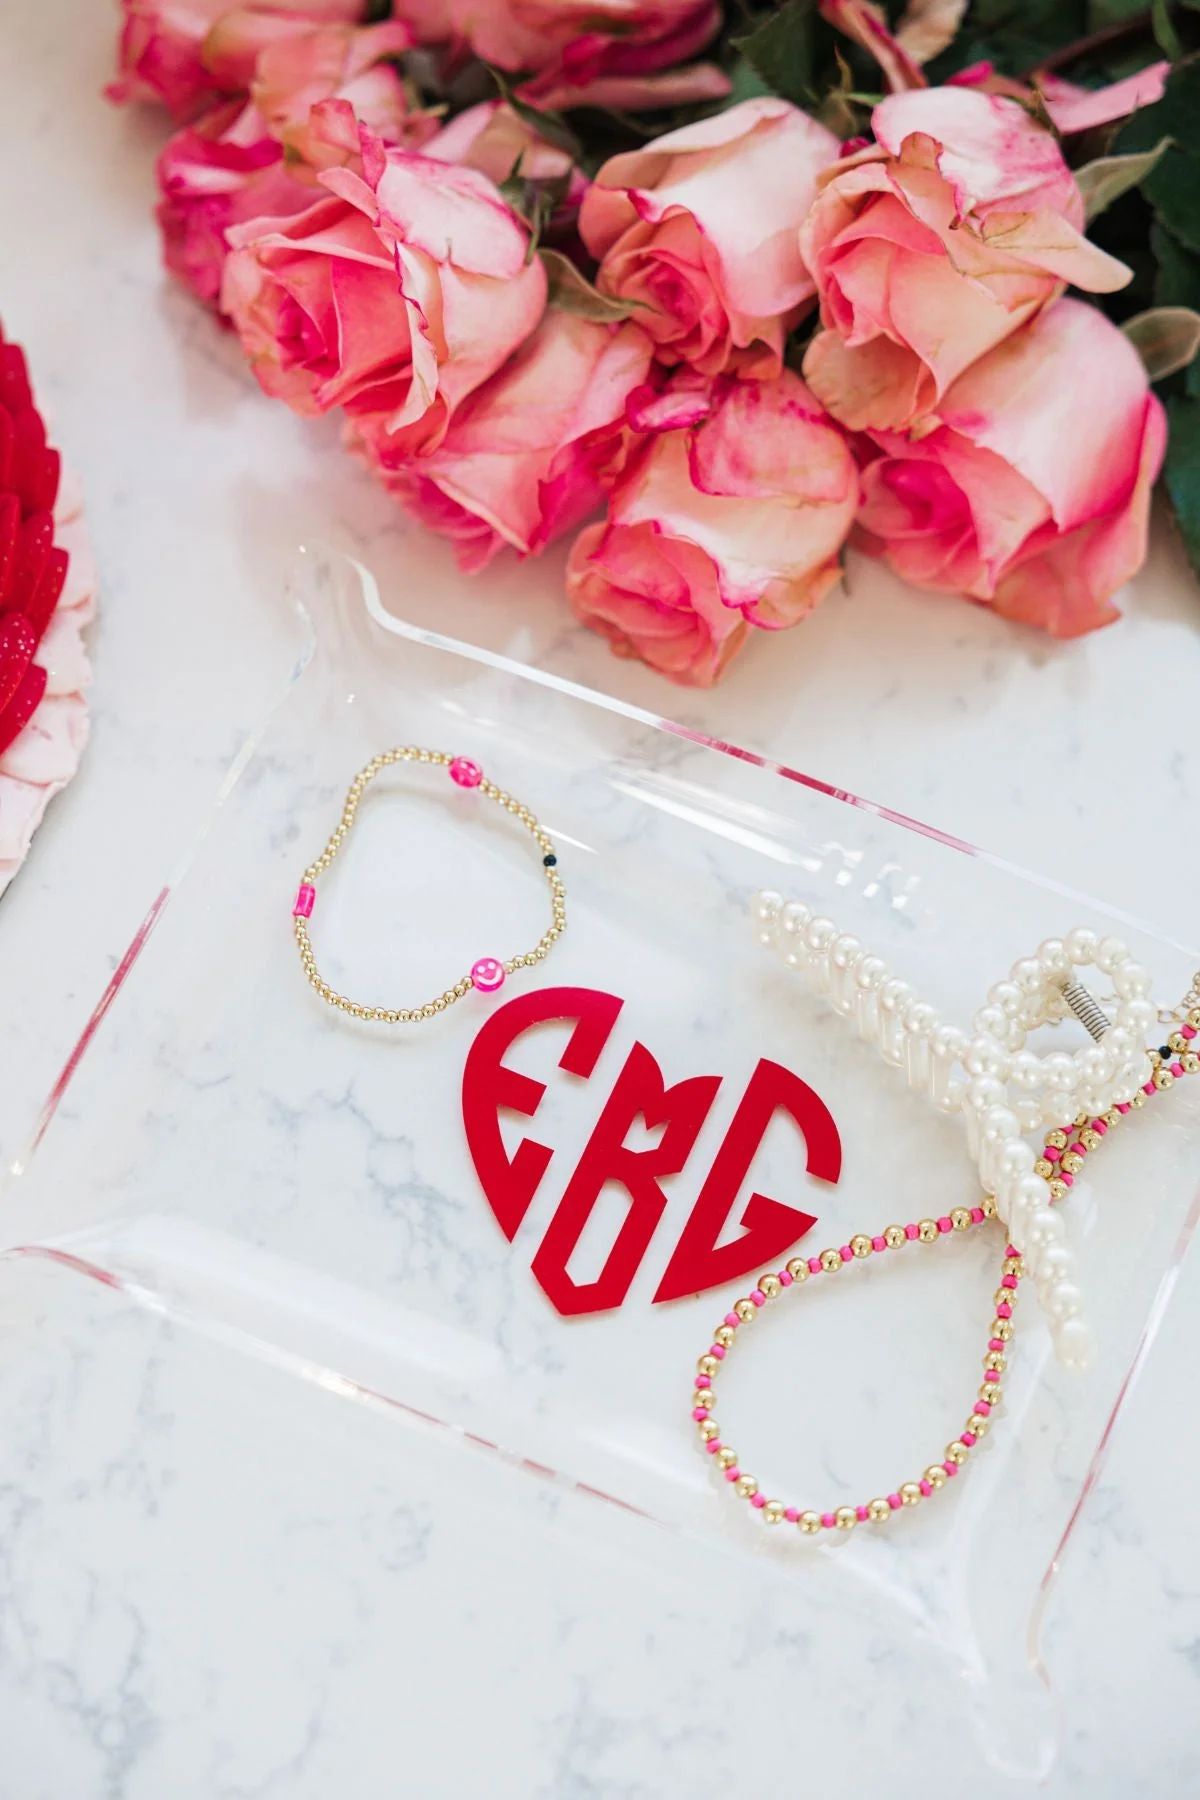 Heart Monogram Acrylic Tray | Sprinkled With Pink